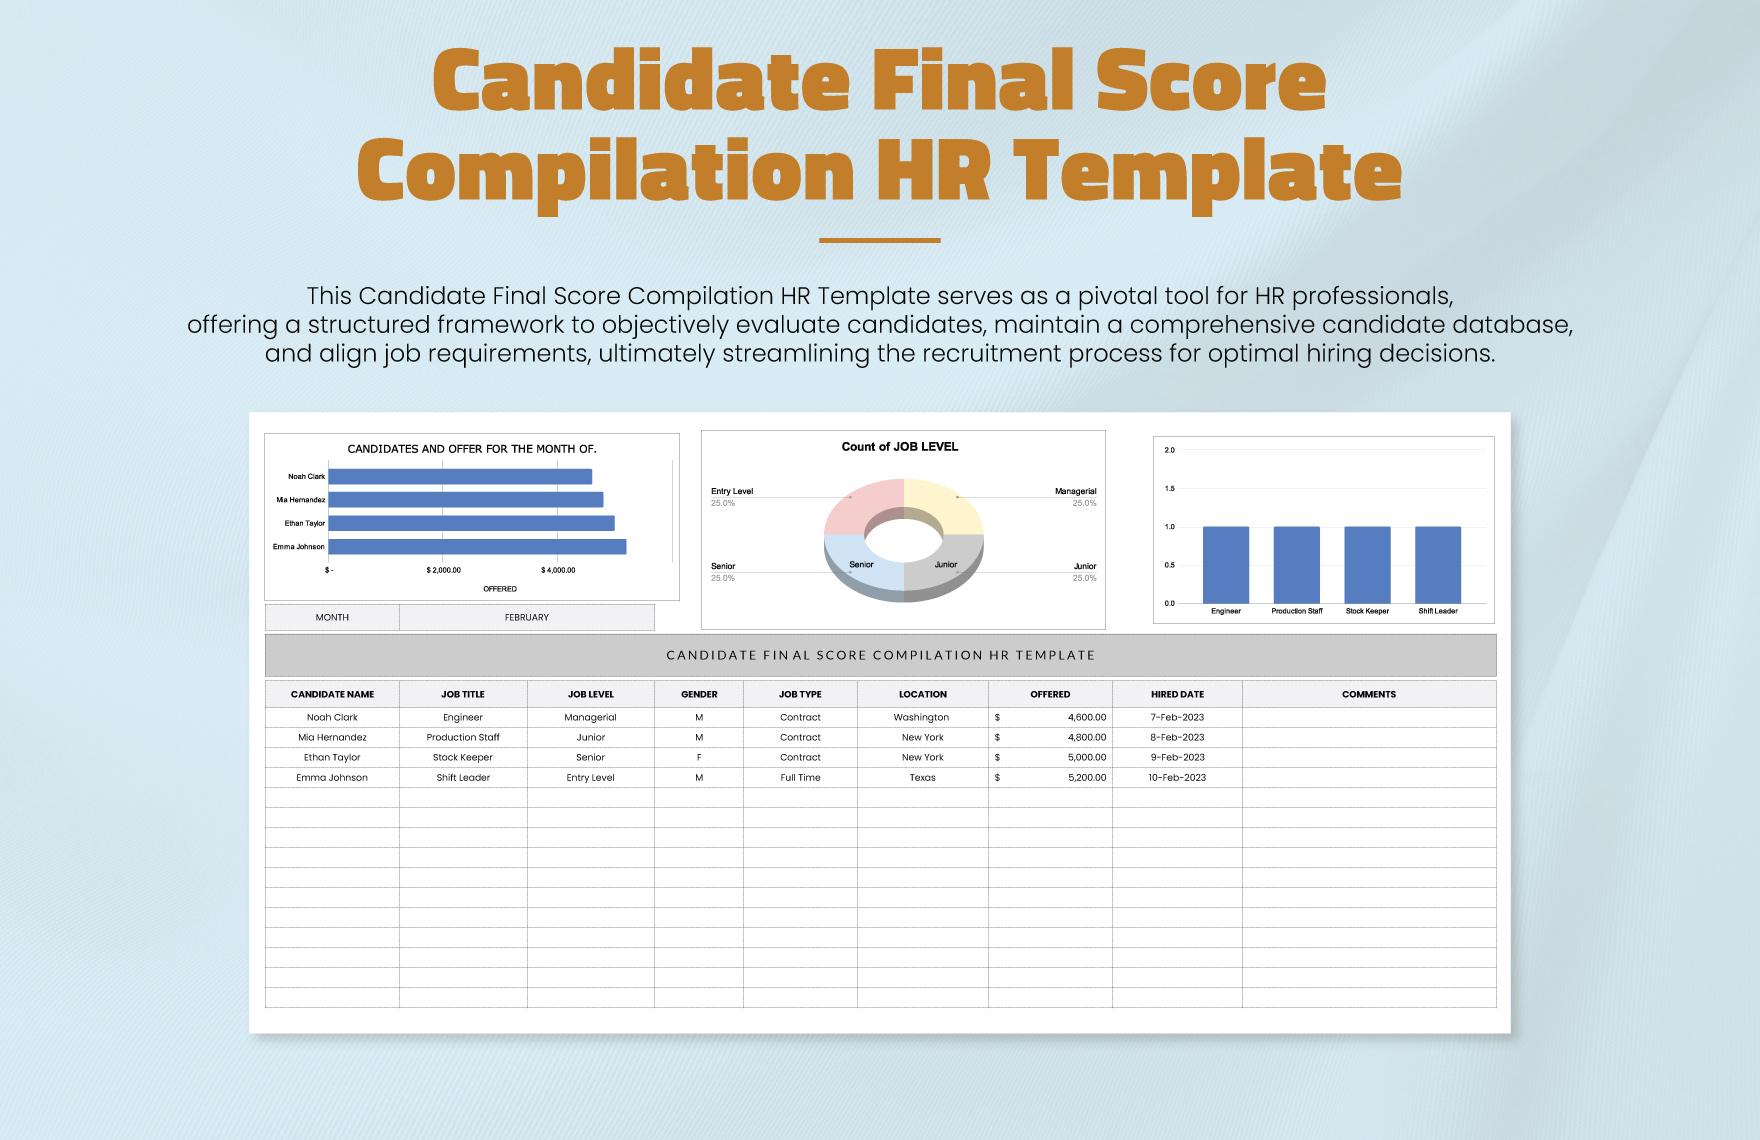 Candidate Final Score Compilation HR Template